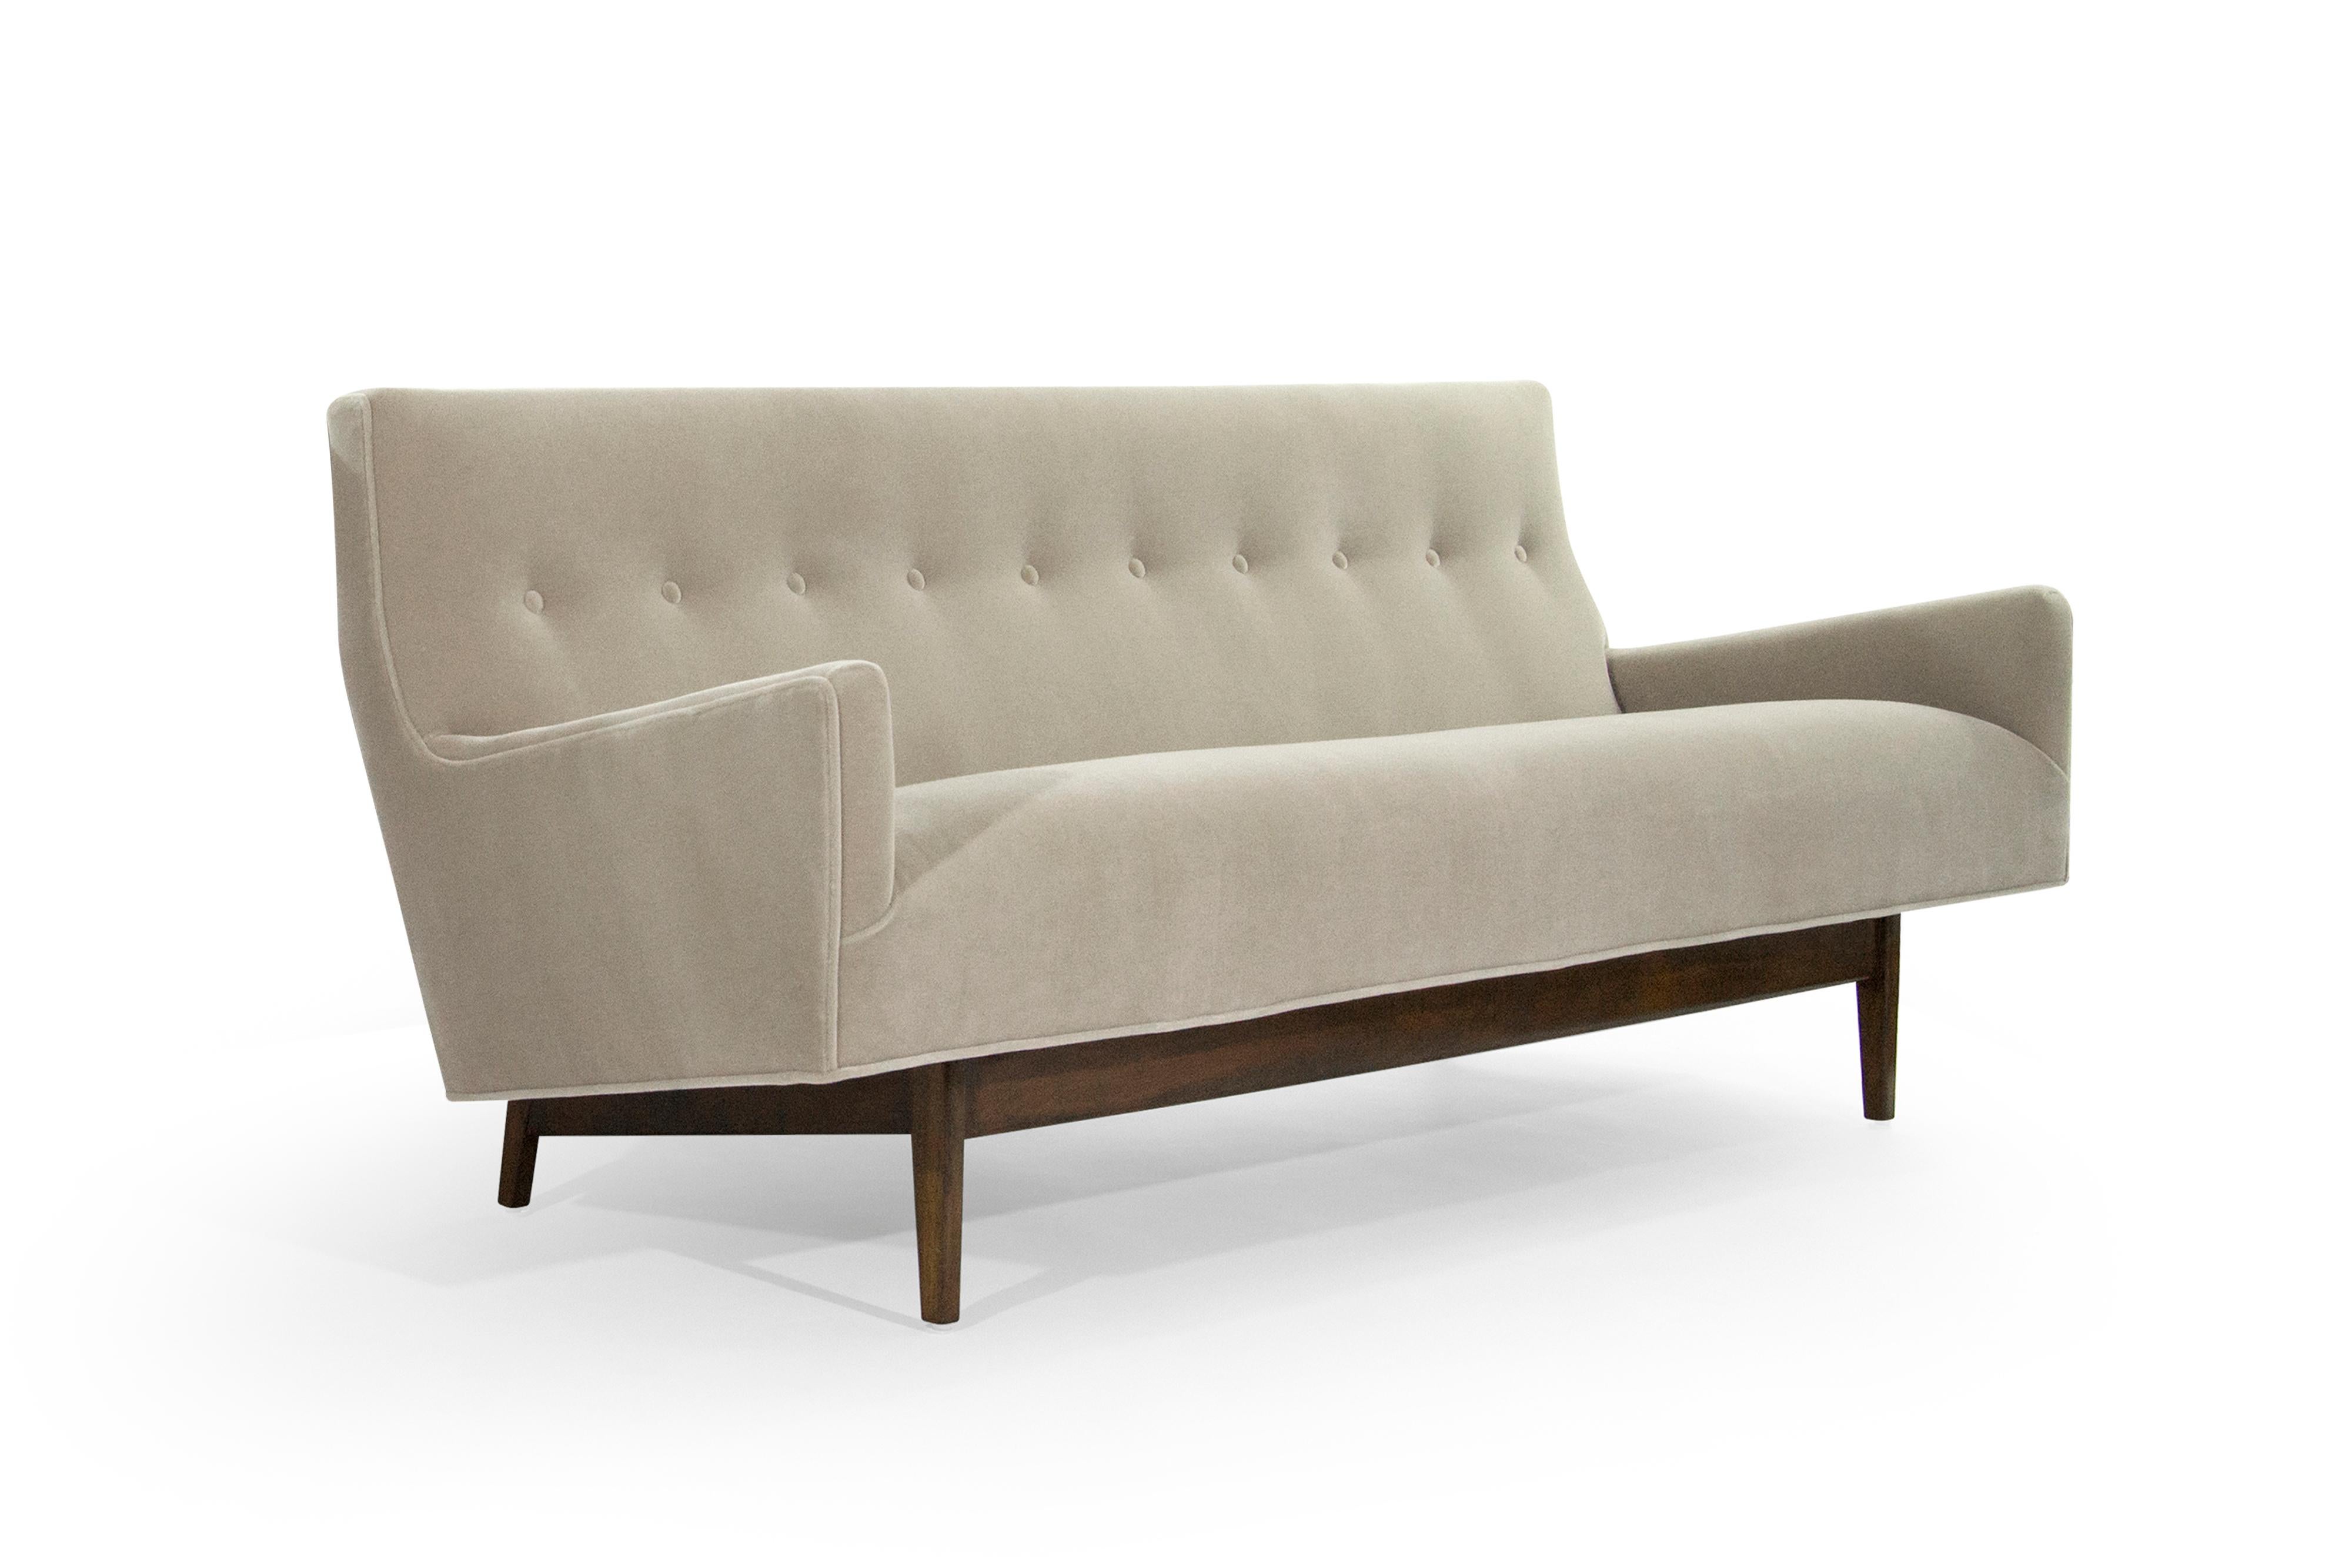 Fully restored down to its bones, fitted with handcut high density foam. Newly upholstered in natural mohair by Schellens. Walnut base in perfect condition.

  